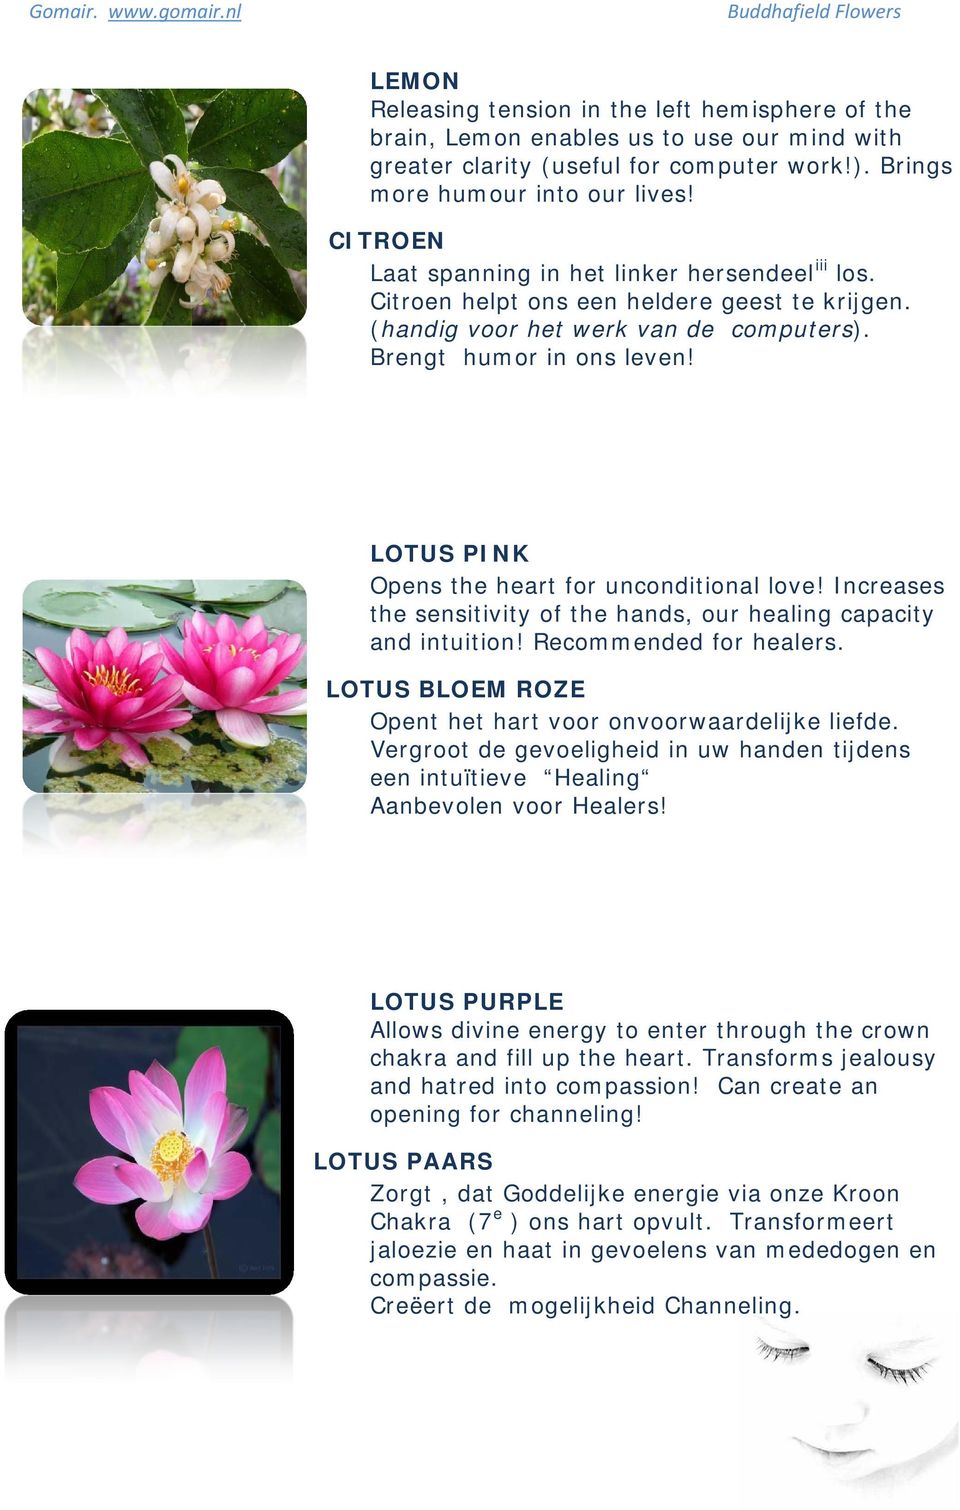 LOTUS PINK Opens the heart for unconditional love! Increases the sensitivity of the hands, our healing capacity and intuition! Recommended for healers.